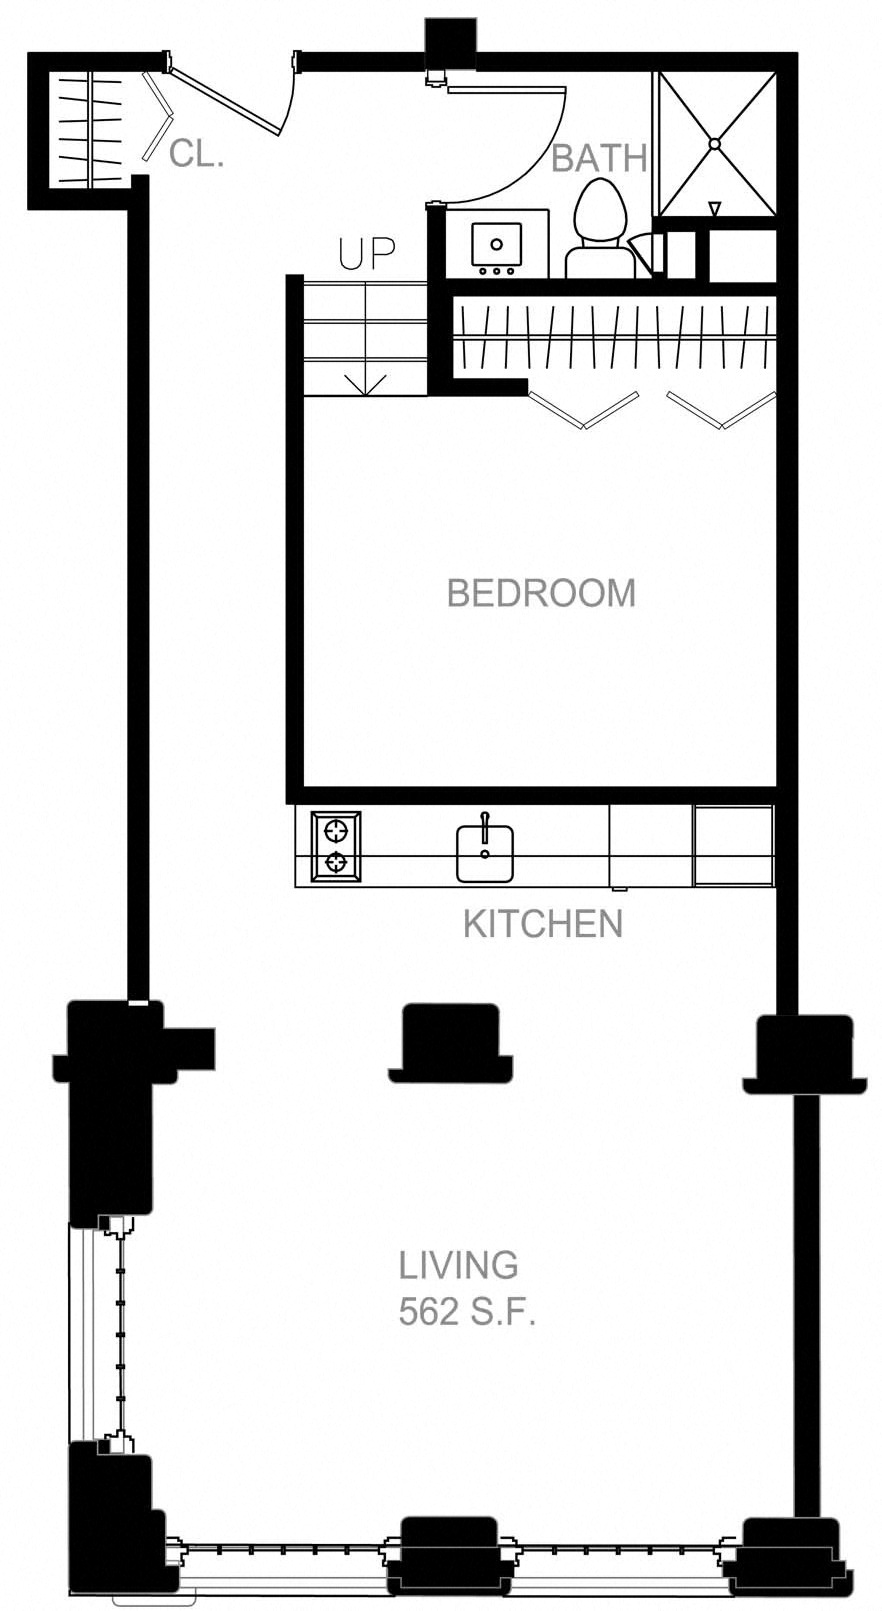 Floorplan for Apartment #S2325, 0 bedroom unit at Halstead Providence